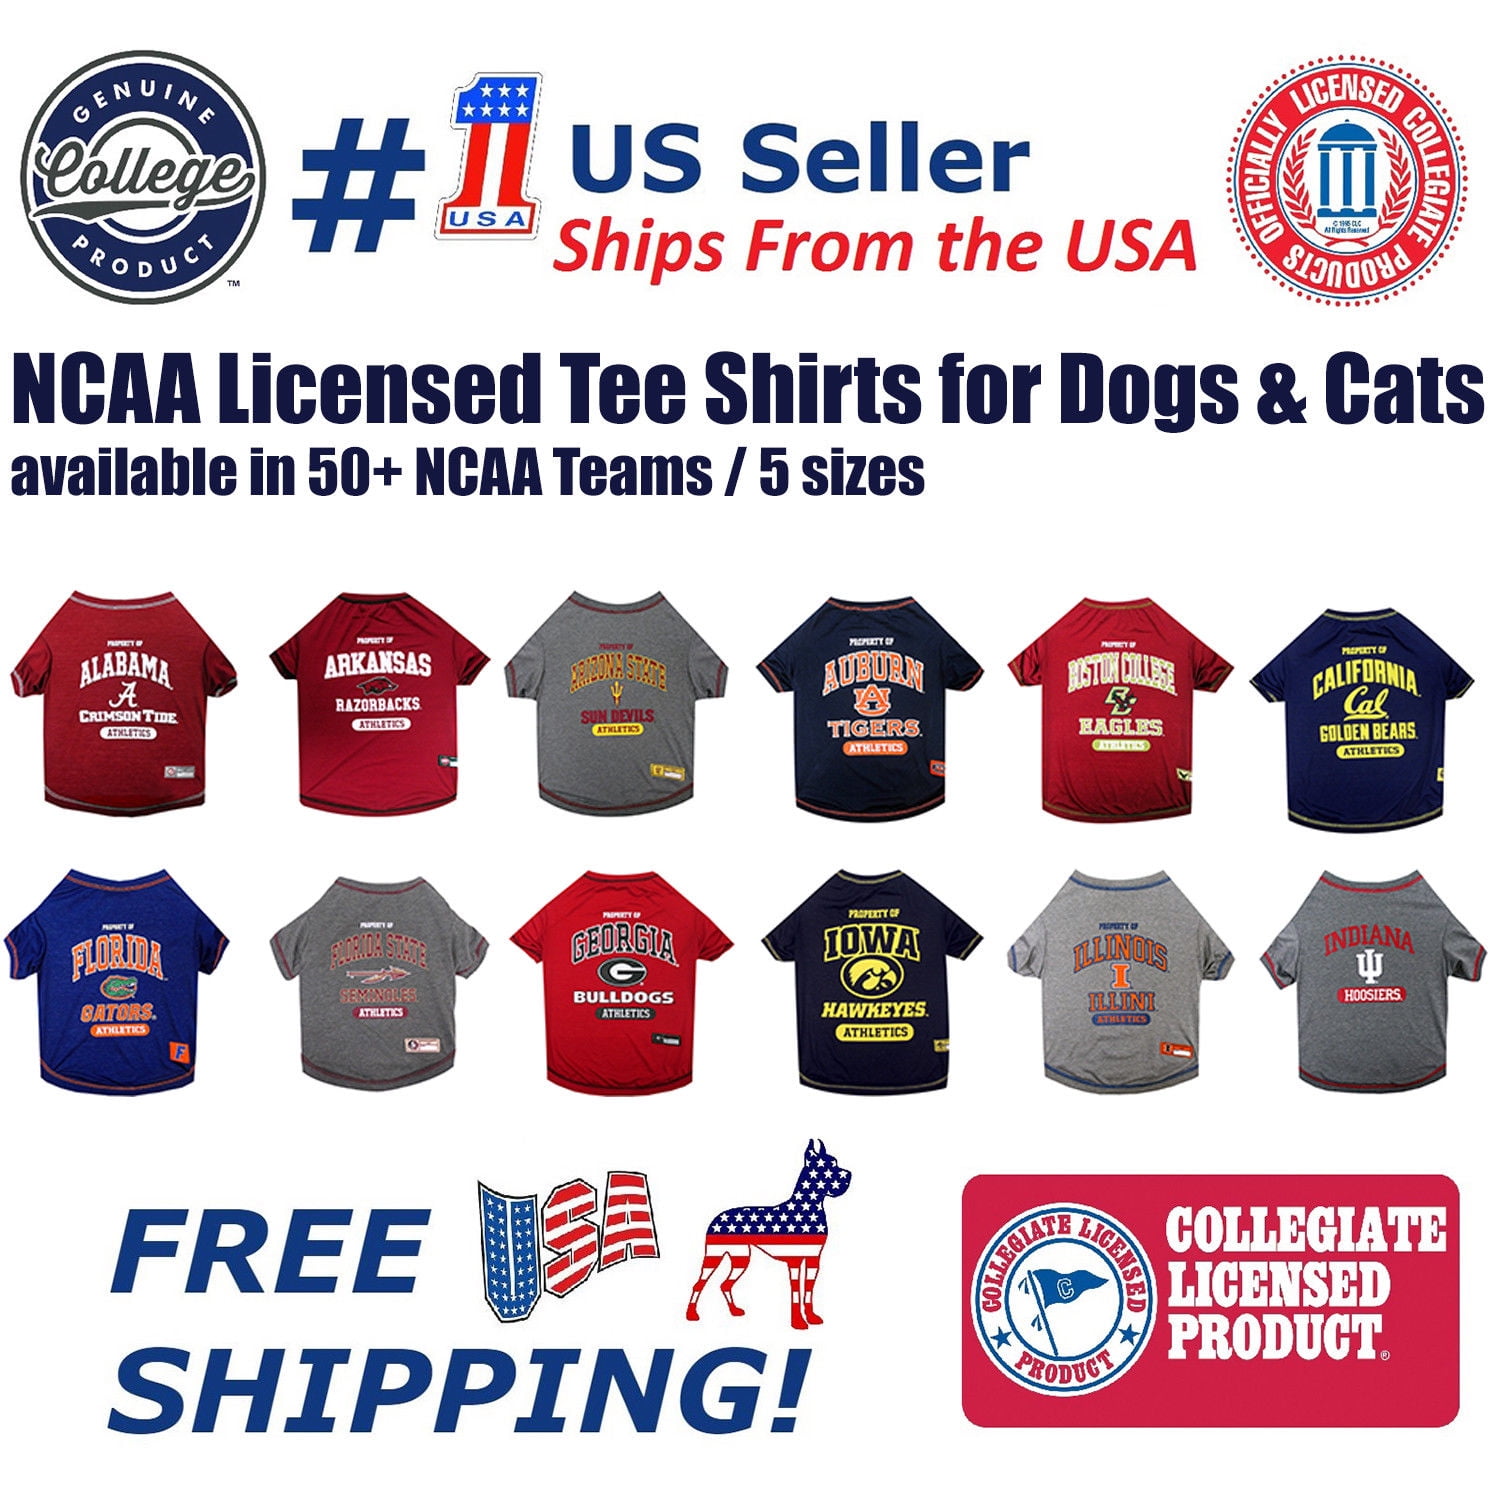 5 Sizes available in 50+ SCHOOL TEAMS Football & Basketball DOGS & CATS SHIRT COLLEGE PET OUTFIT NCAA T-SHIRT COLLEGIATE DOG SHIRT DOG TEE SHIRT Durable SPORTS PET TEE 